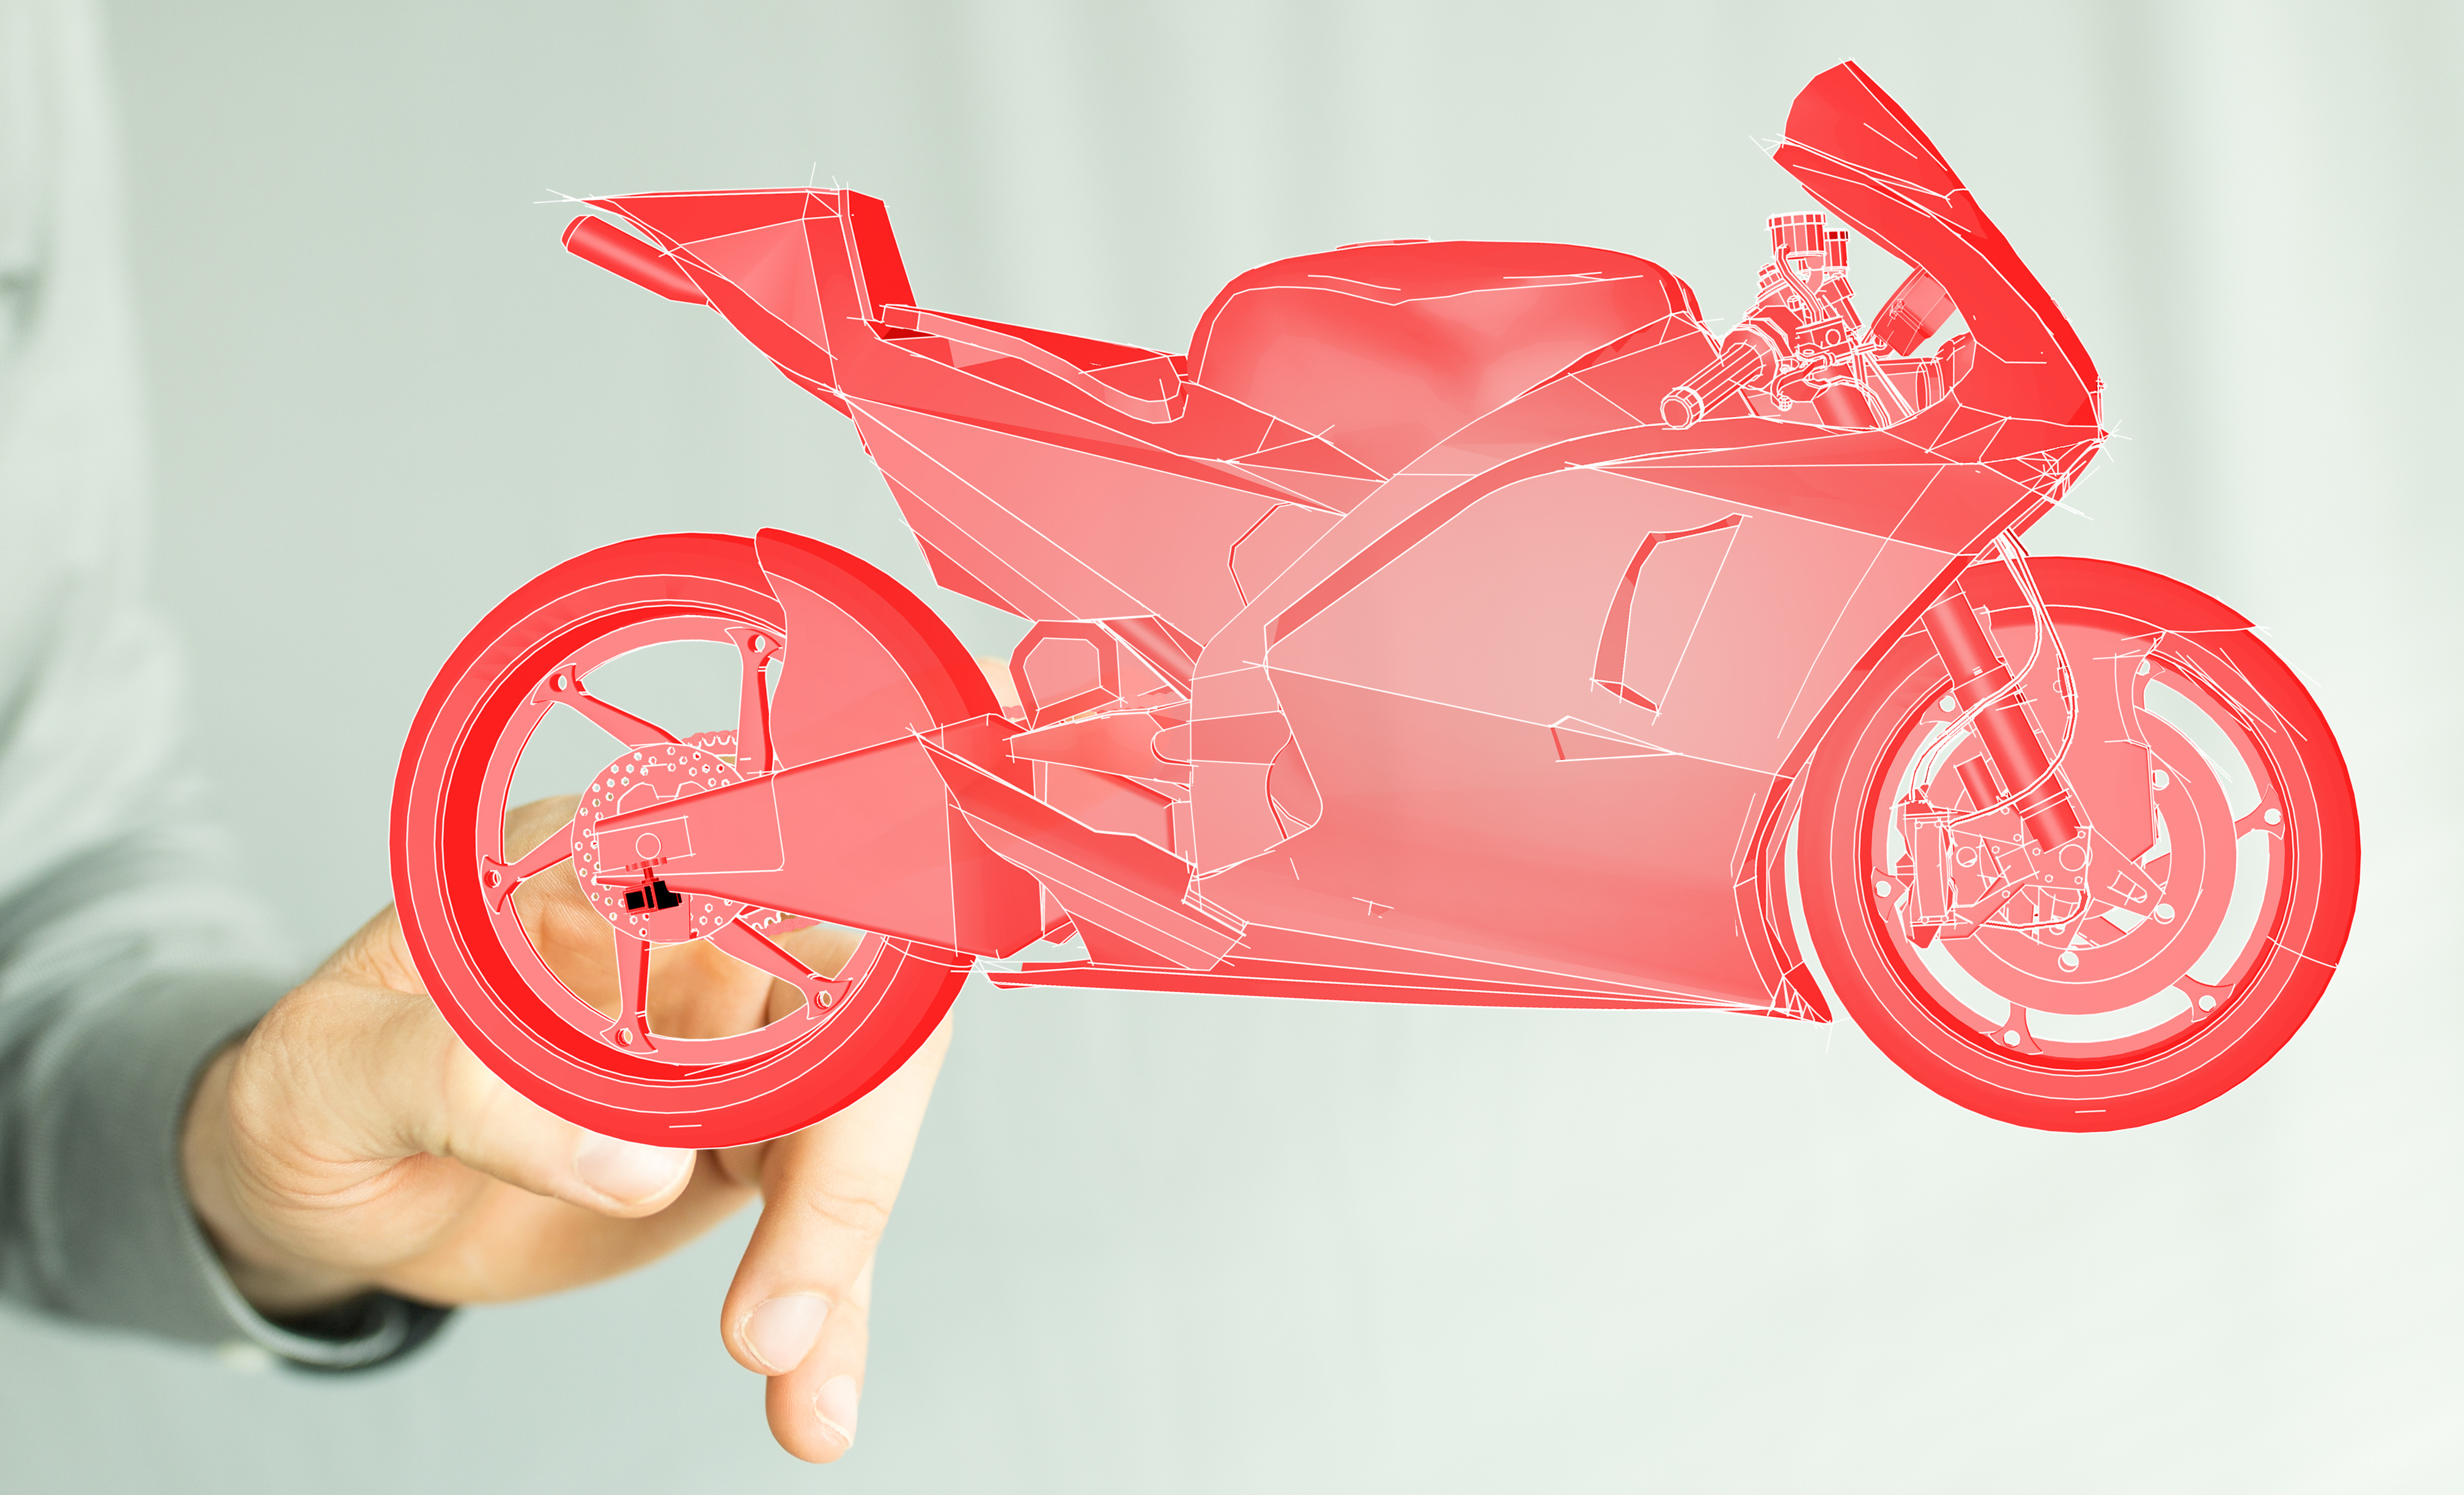 NowLabs-are-creating-the-World-s-first-3D-printed-motorbike